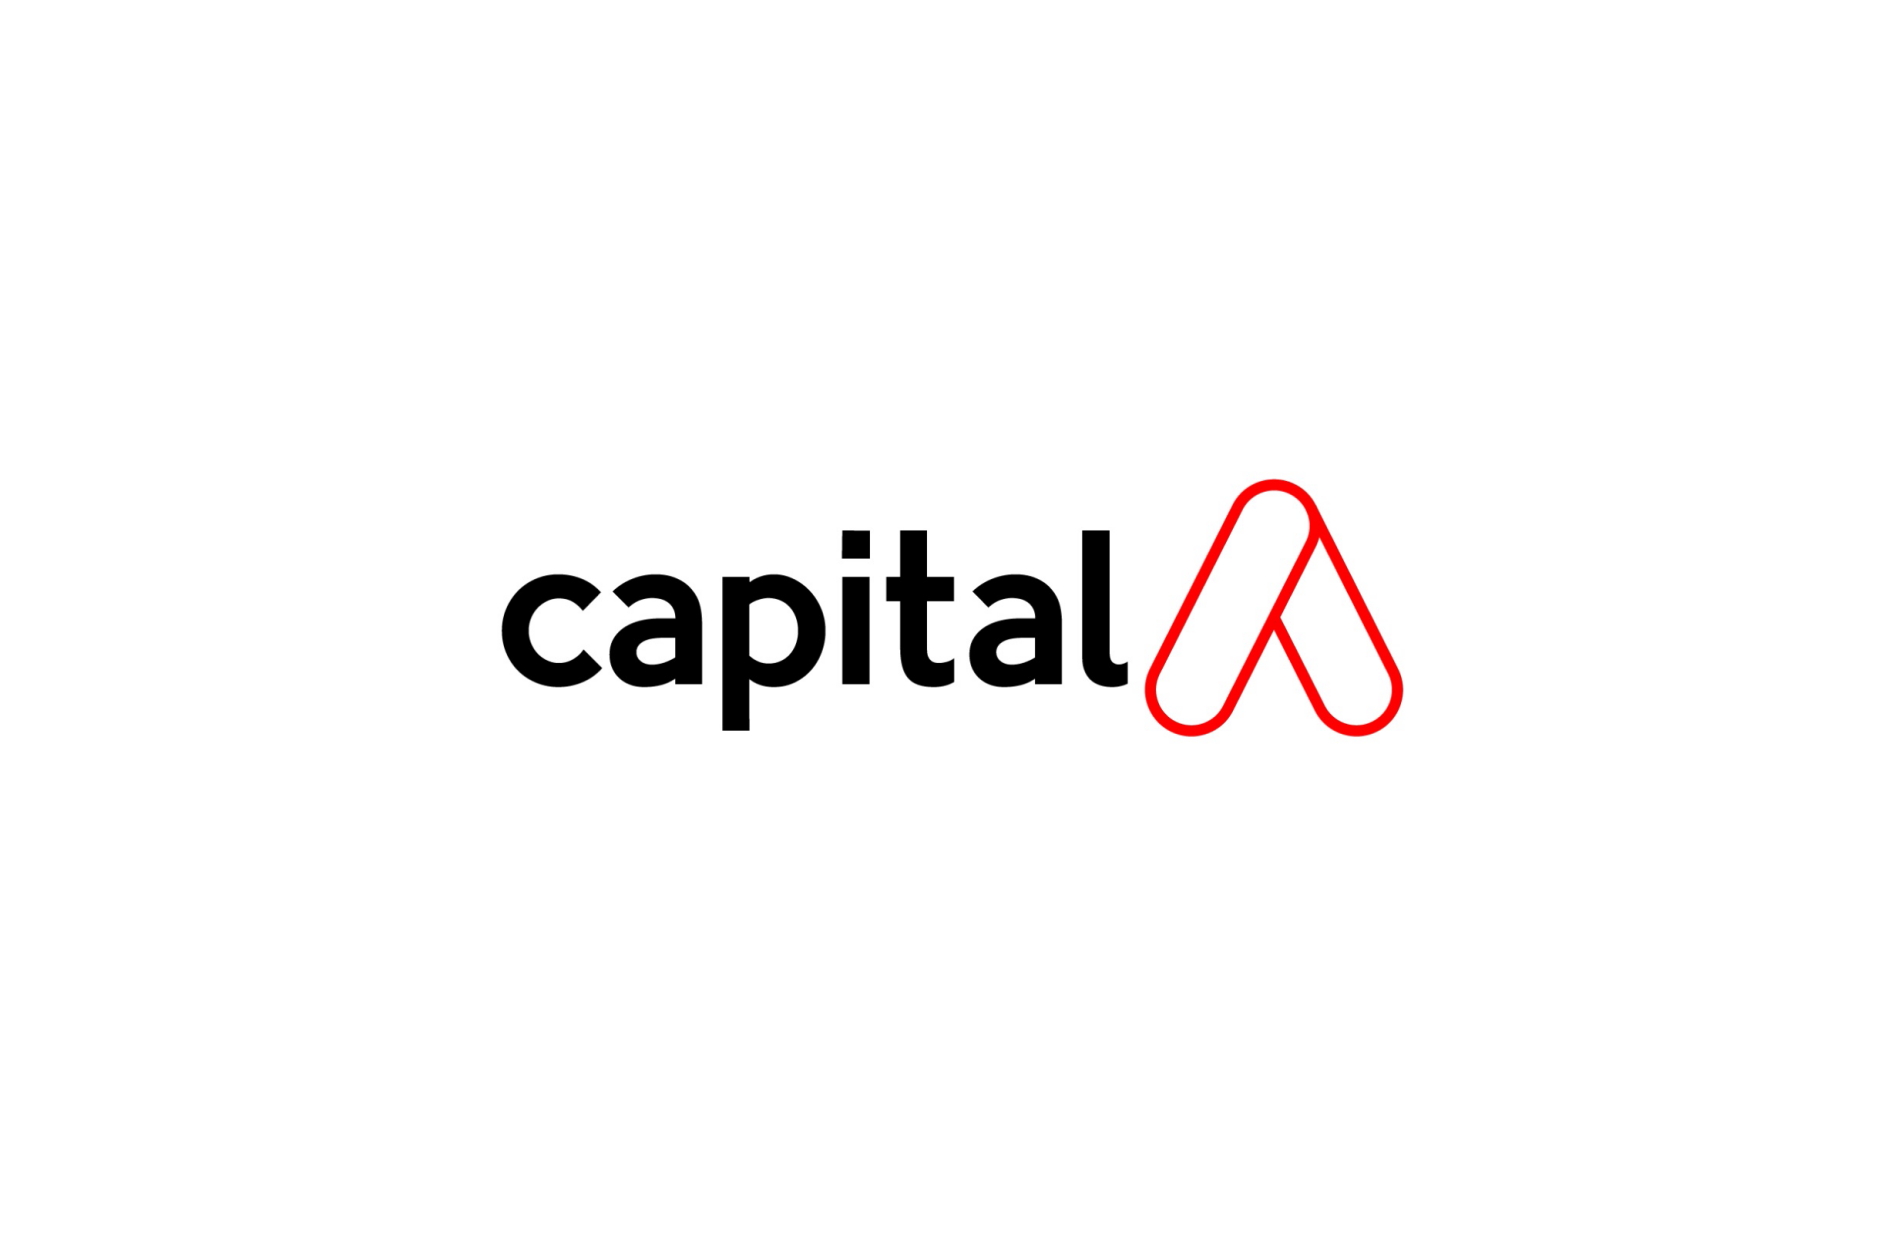 Capital A logo. Click to enlarge.